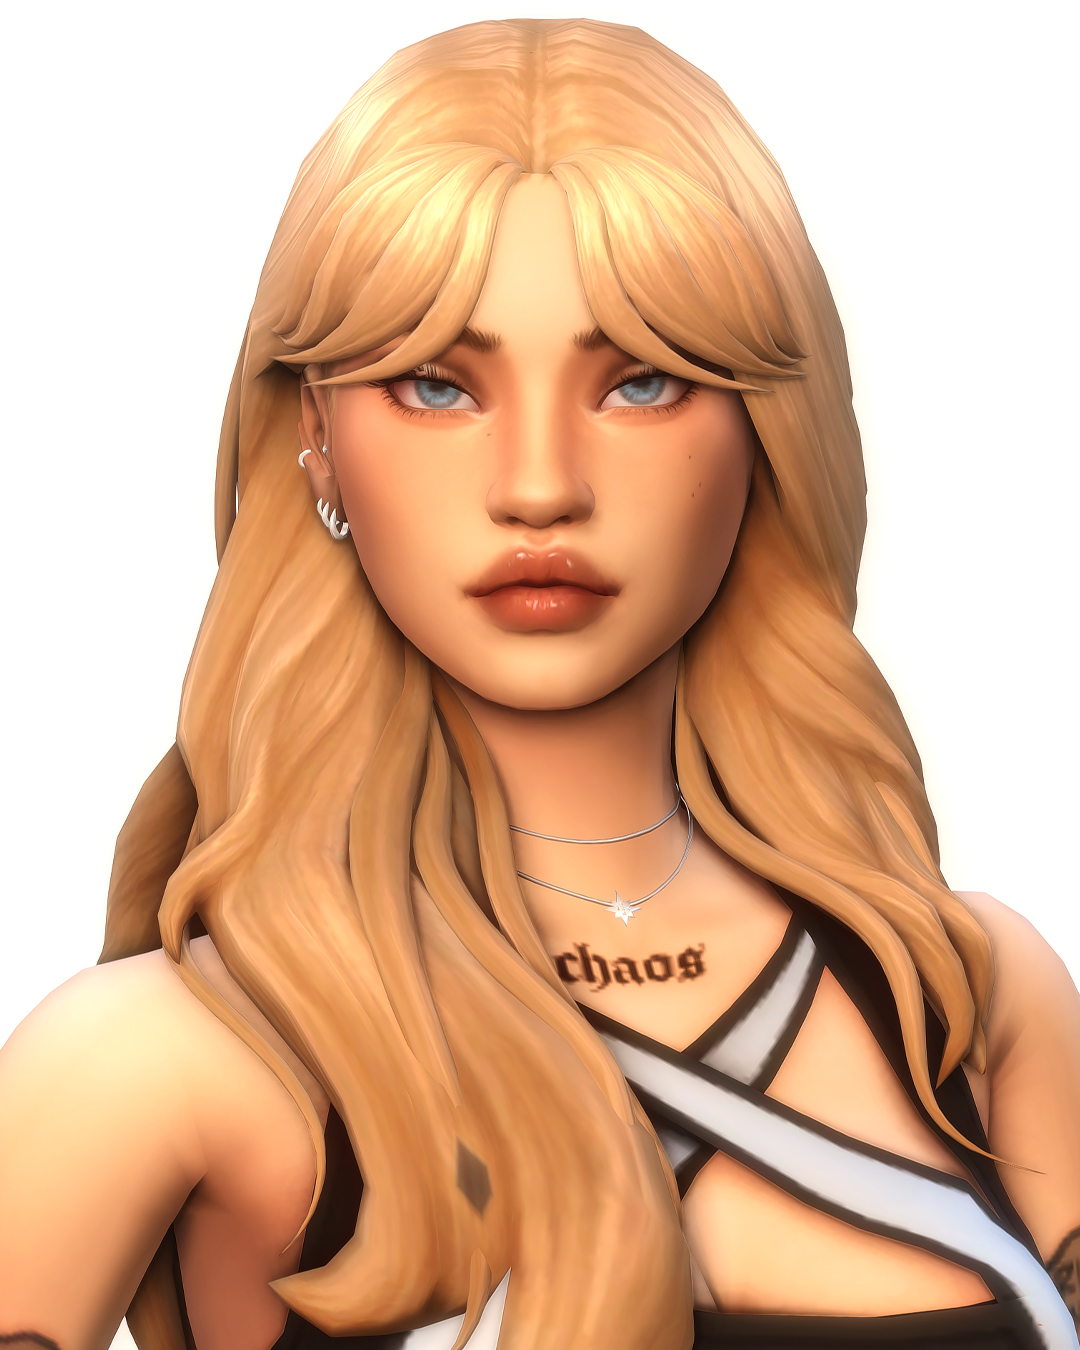 Fallon Walsh - The Sims 4 Sims / Households - CurseForge